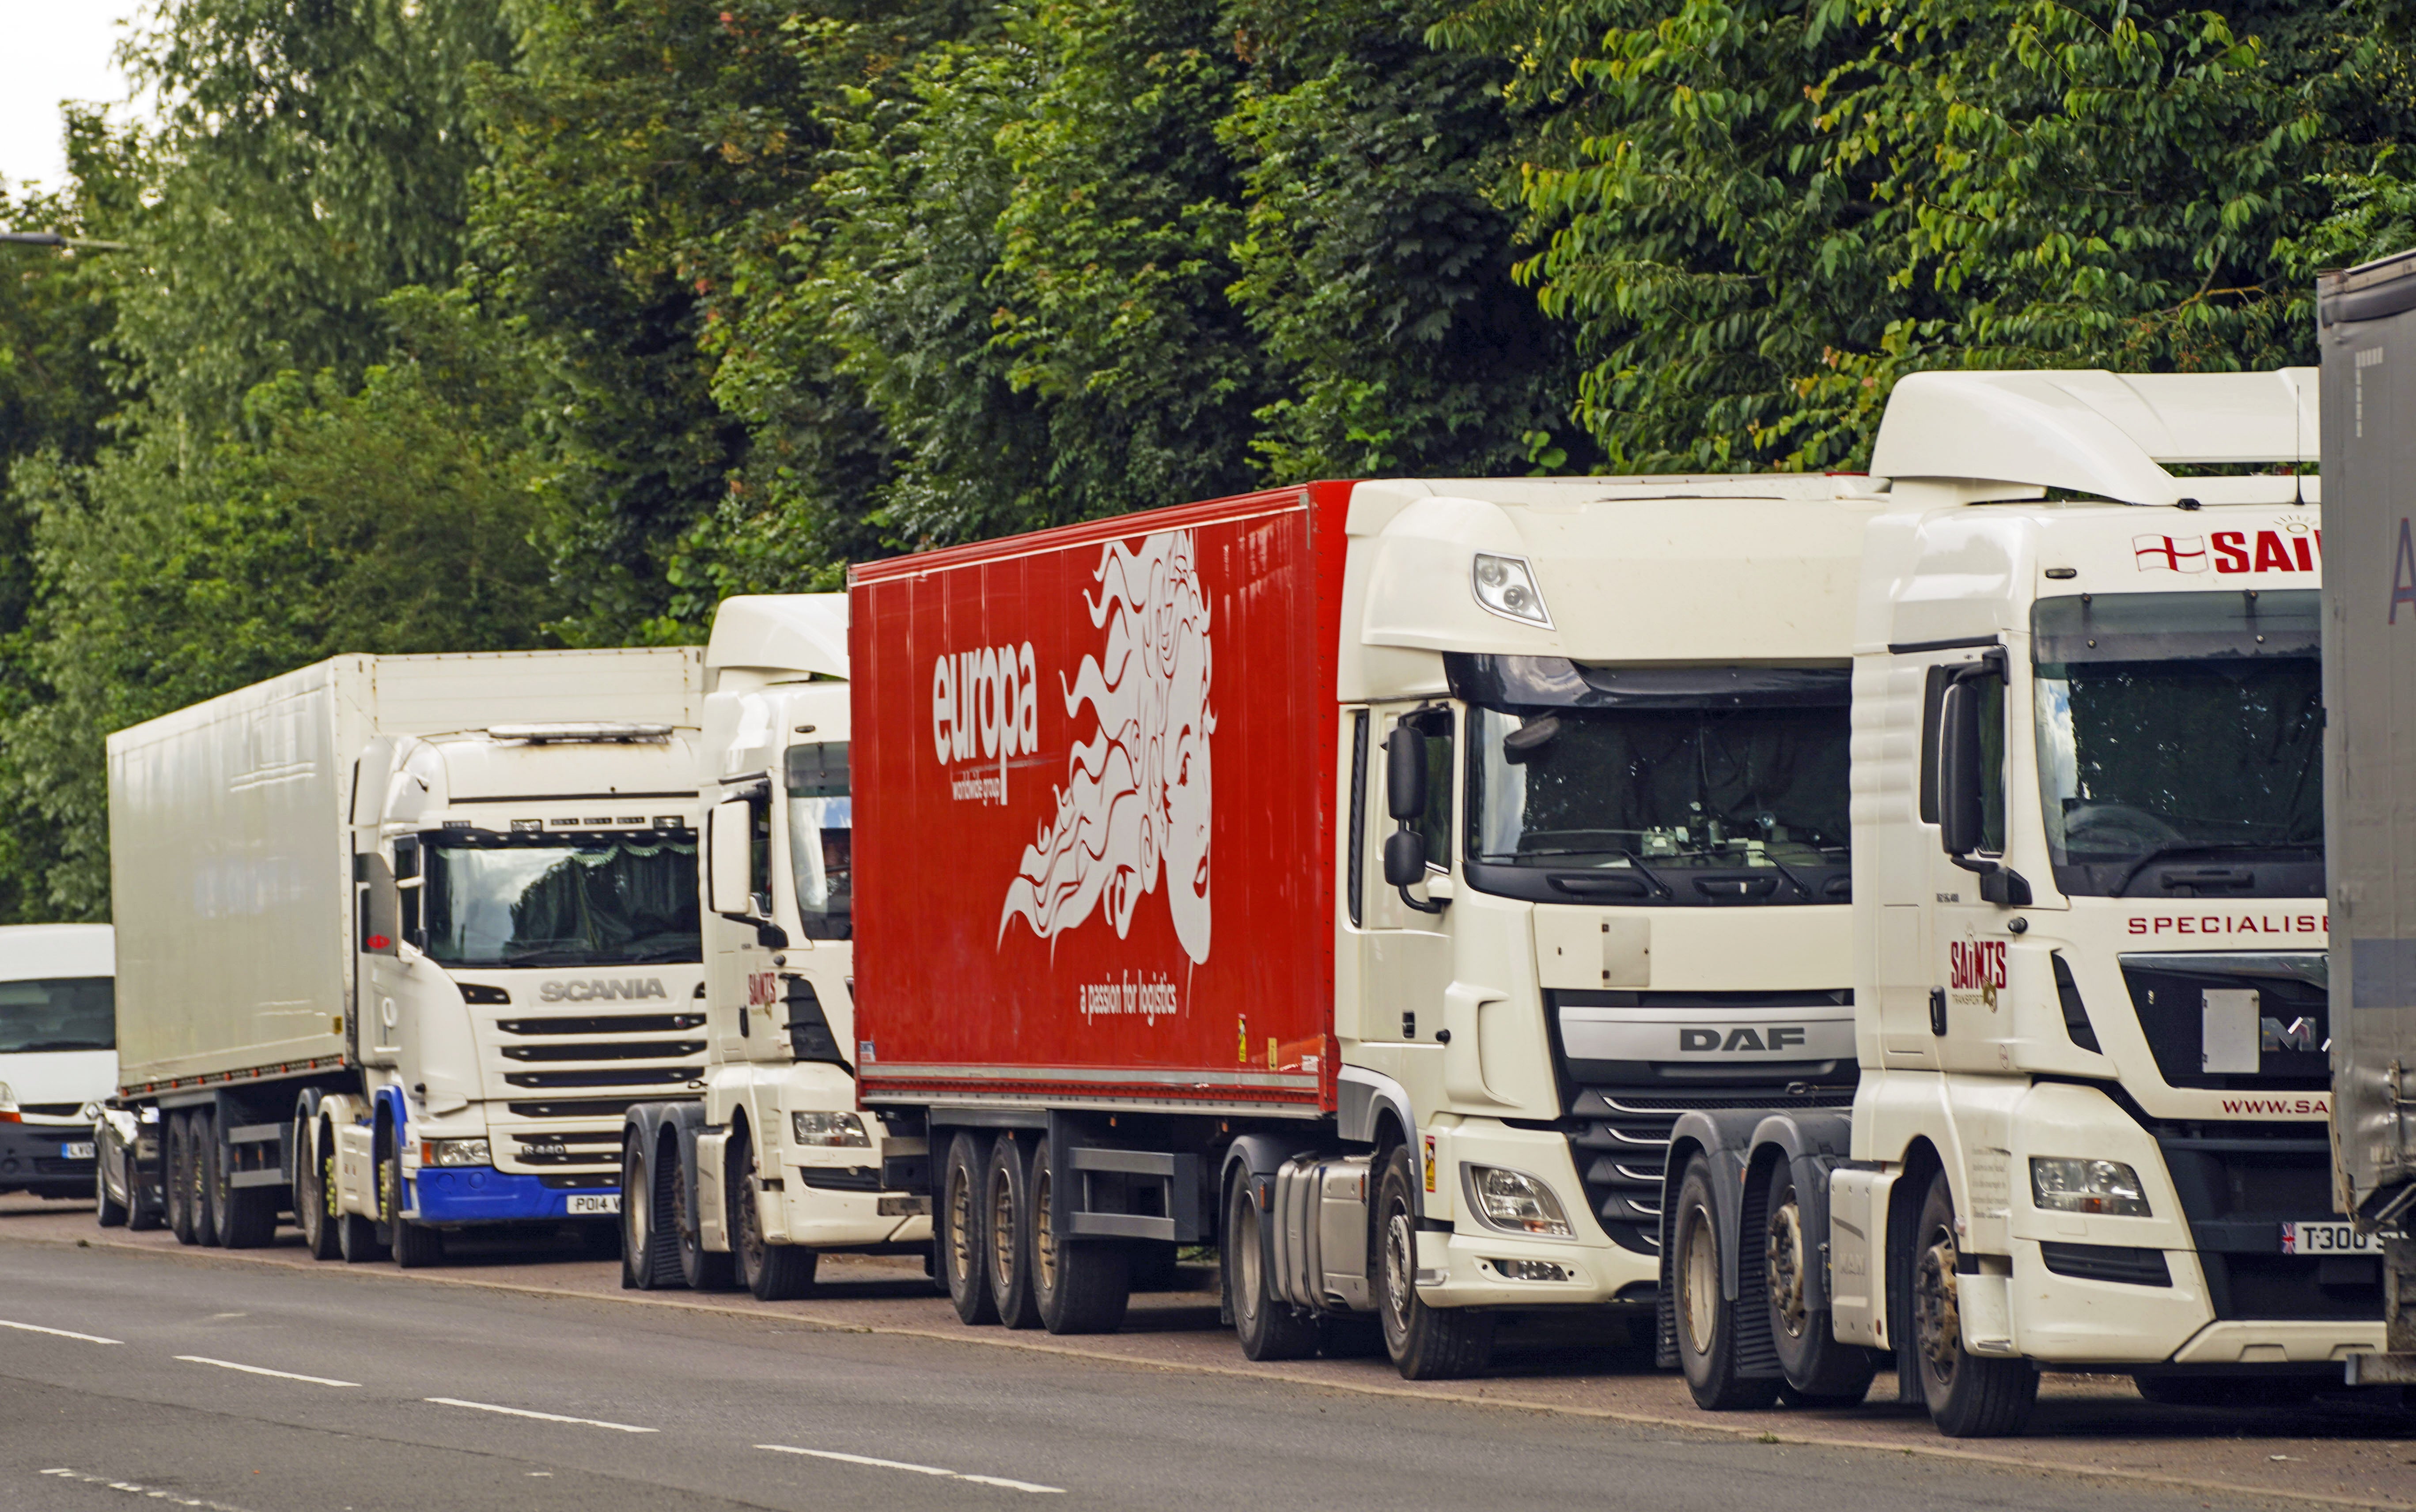 Building materials supplier Selco has launched a training programme offering staff the chance to become lorry drivers to help ease the nationwide shortage (Steve Parsons/PA)